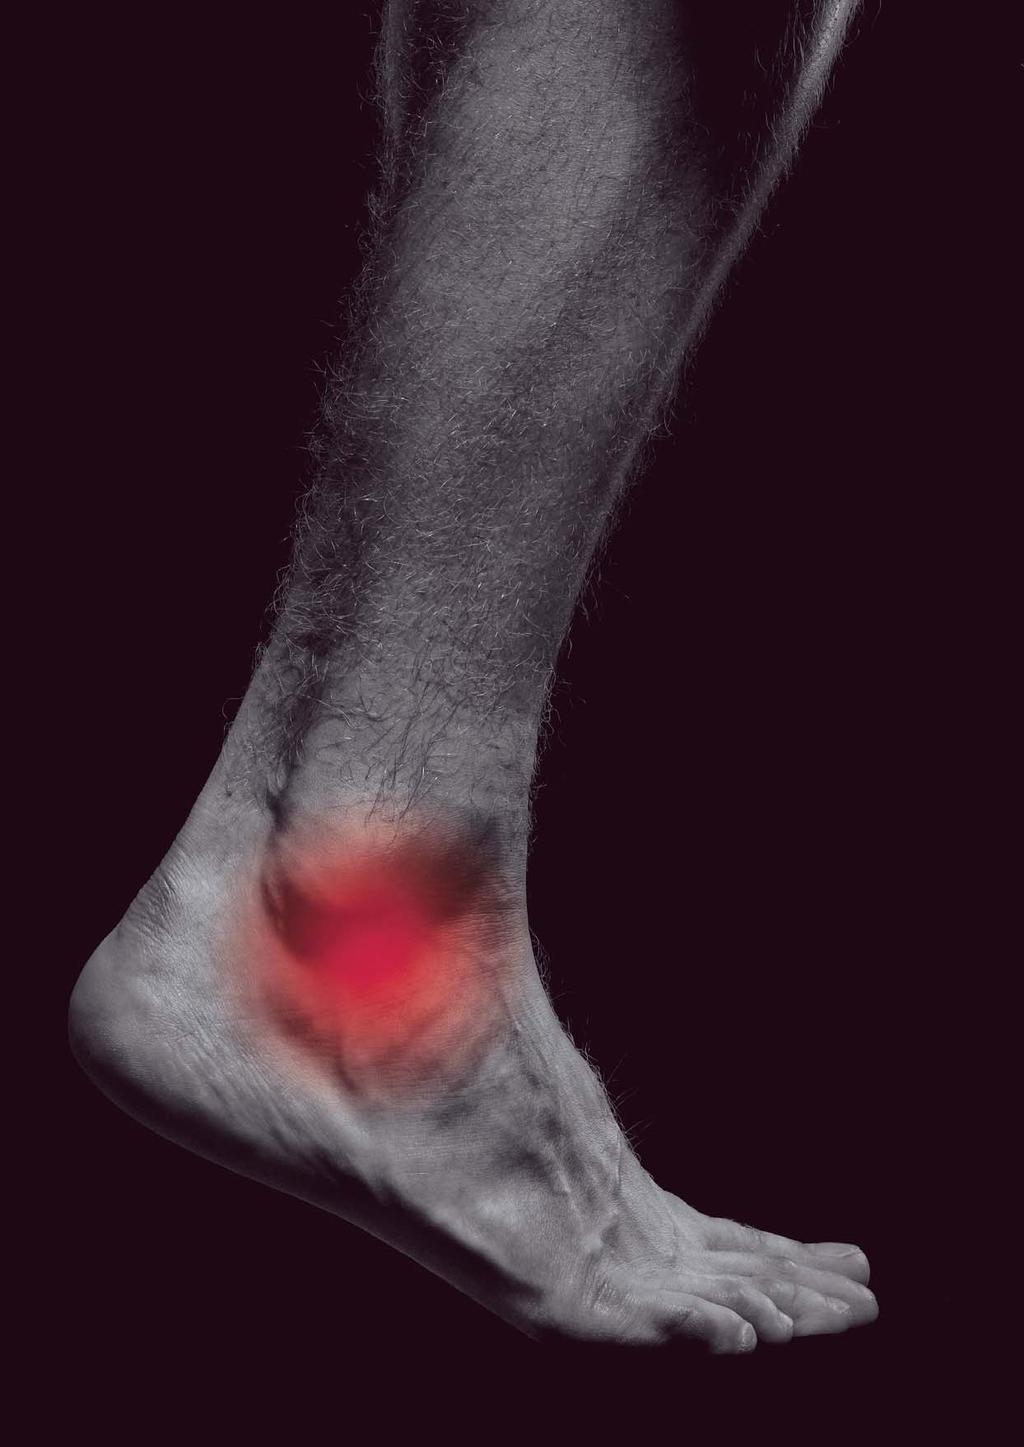 THE ANKLE IS ONE OF THE MOST INJURIED JOINTS IN THE BODY. Even a light sprain can prove to be complicated and lead to instability. A correct acute treatment is essencial for a fast rehabilitation.